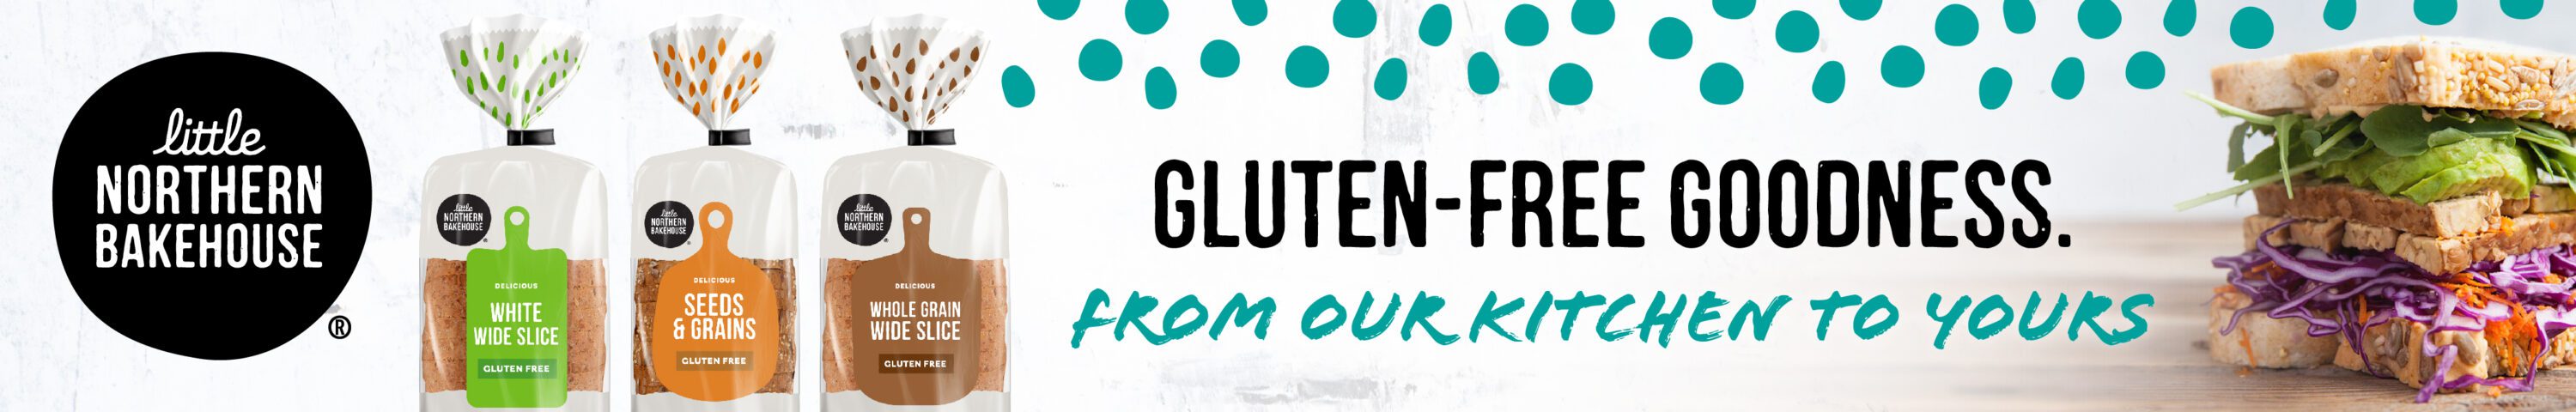 An ad for Little Northern Bakehouse. Reads, "Gluten-free goodness from our kitchen to yours."